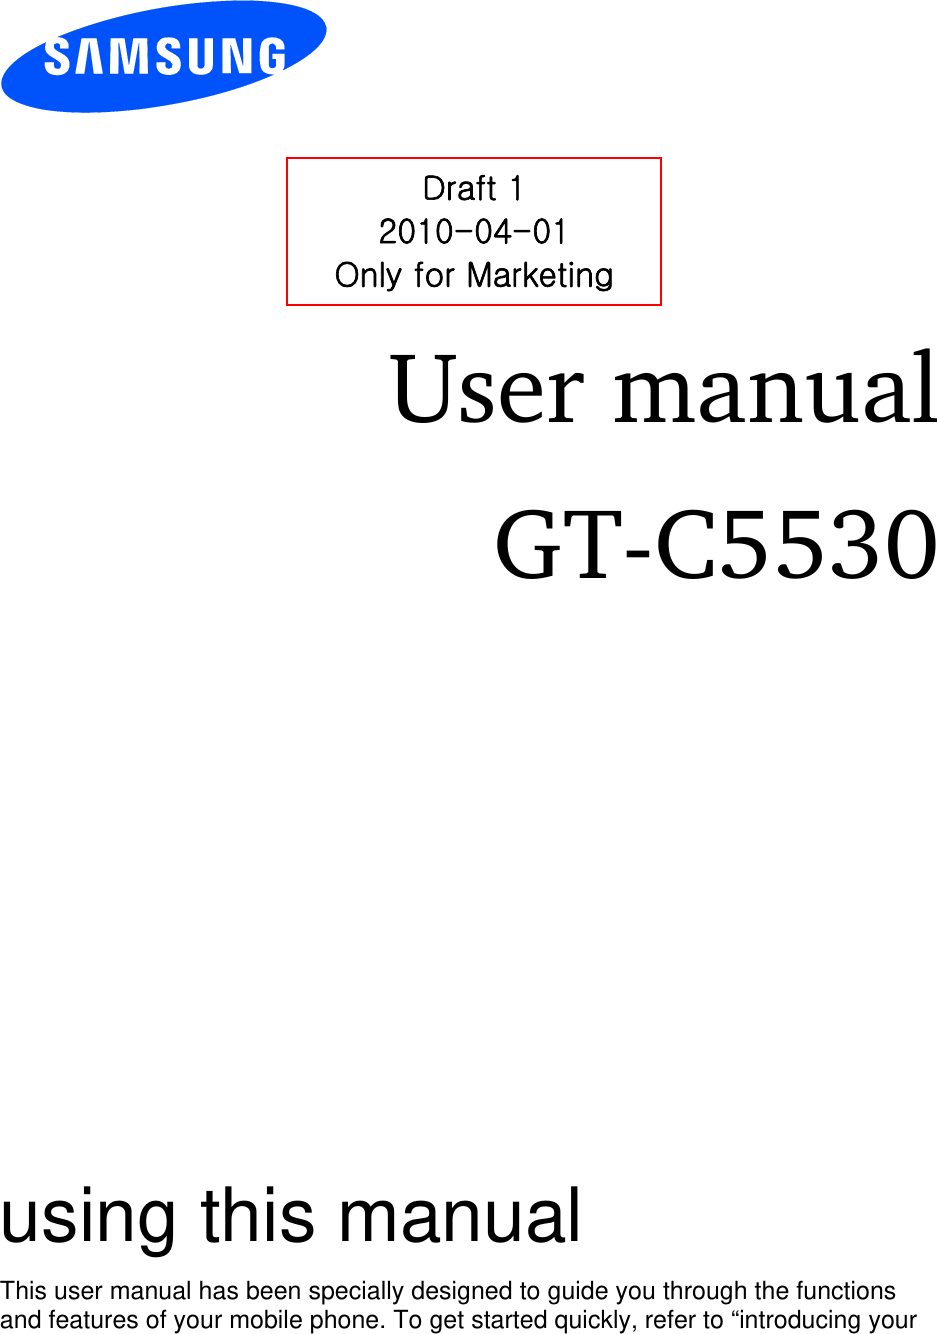          User manual GT-C5530                  using this manual This user manual has been specially designed to guide you through the functions and features of your mobile phone. To get started quickly, refer to “introducing your Draft 1 2010-04-01 Only for Marketing 